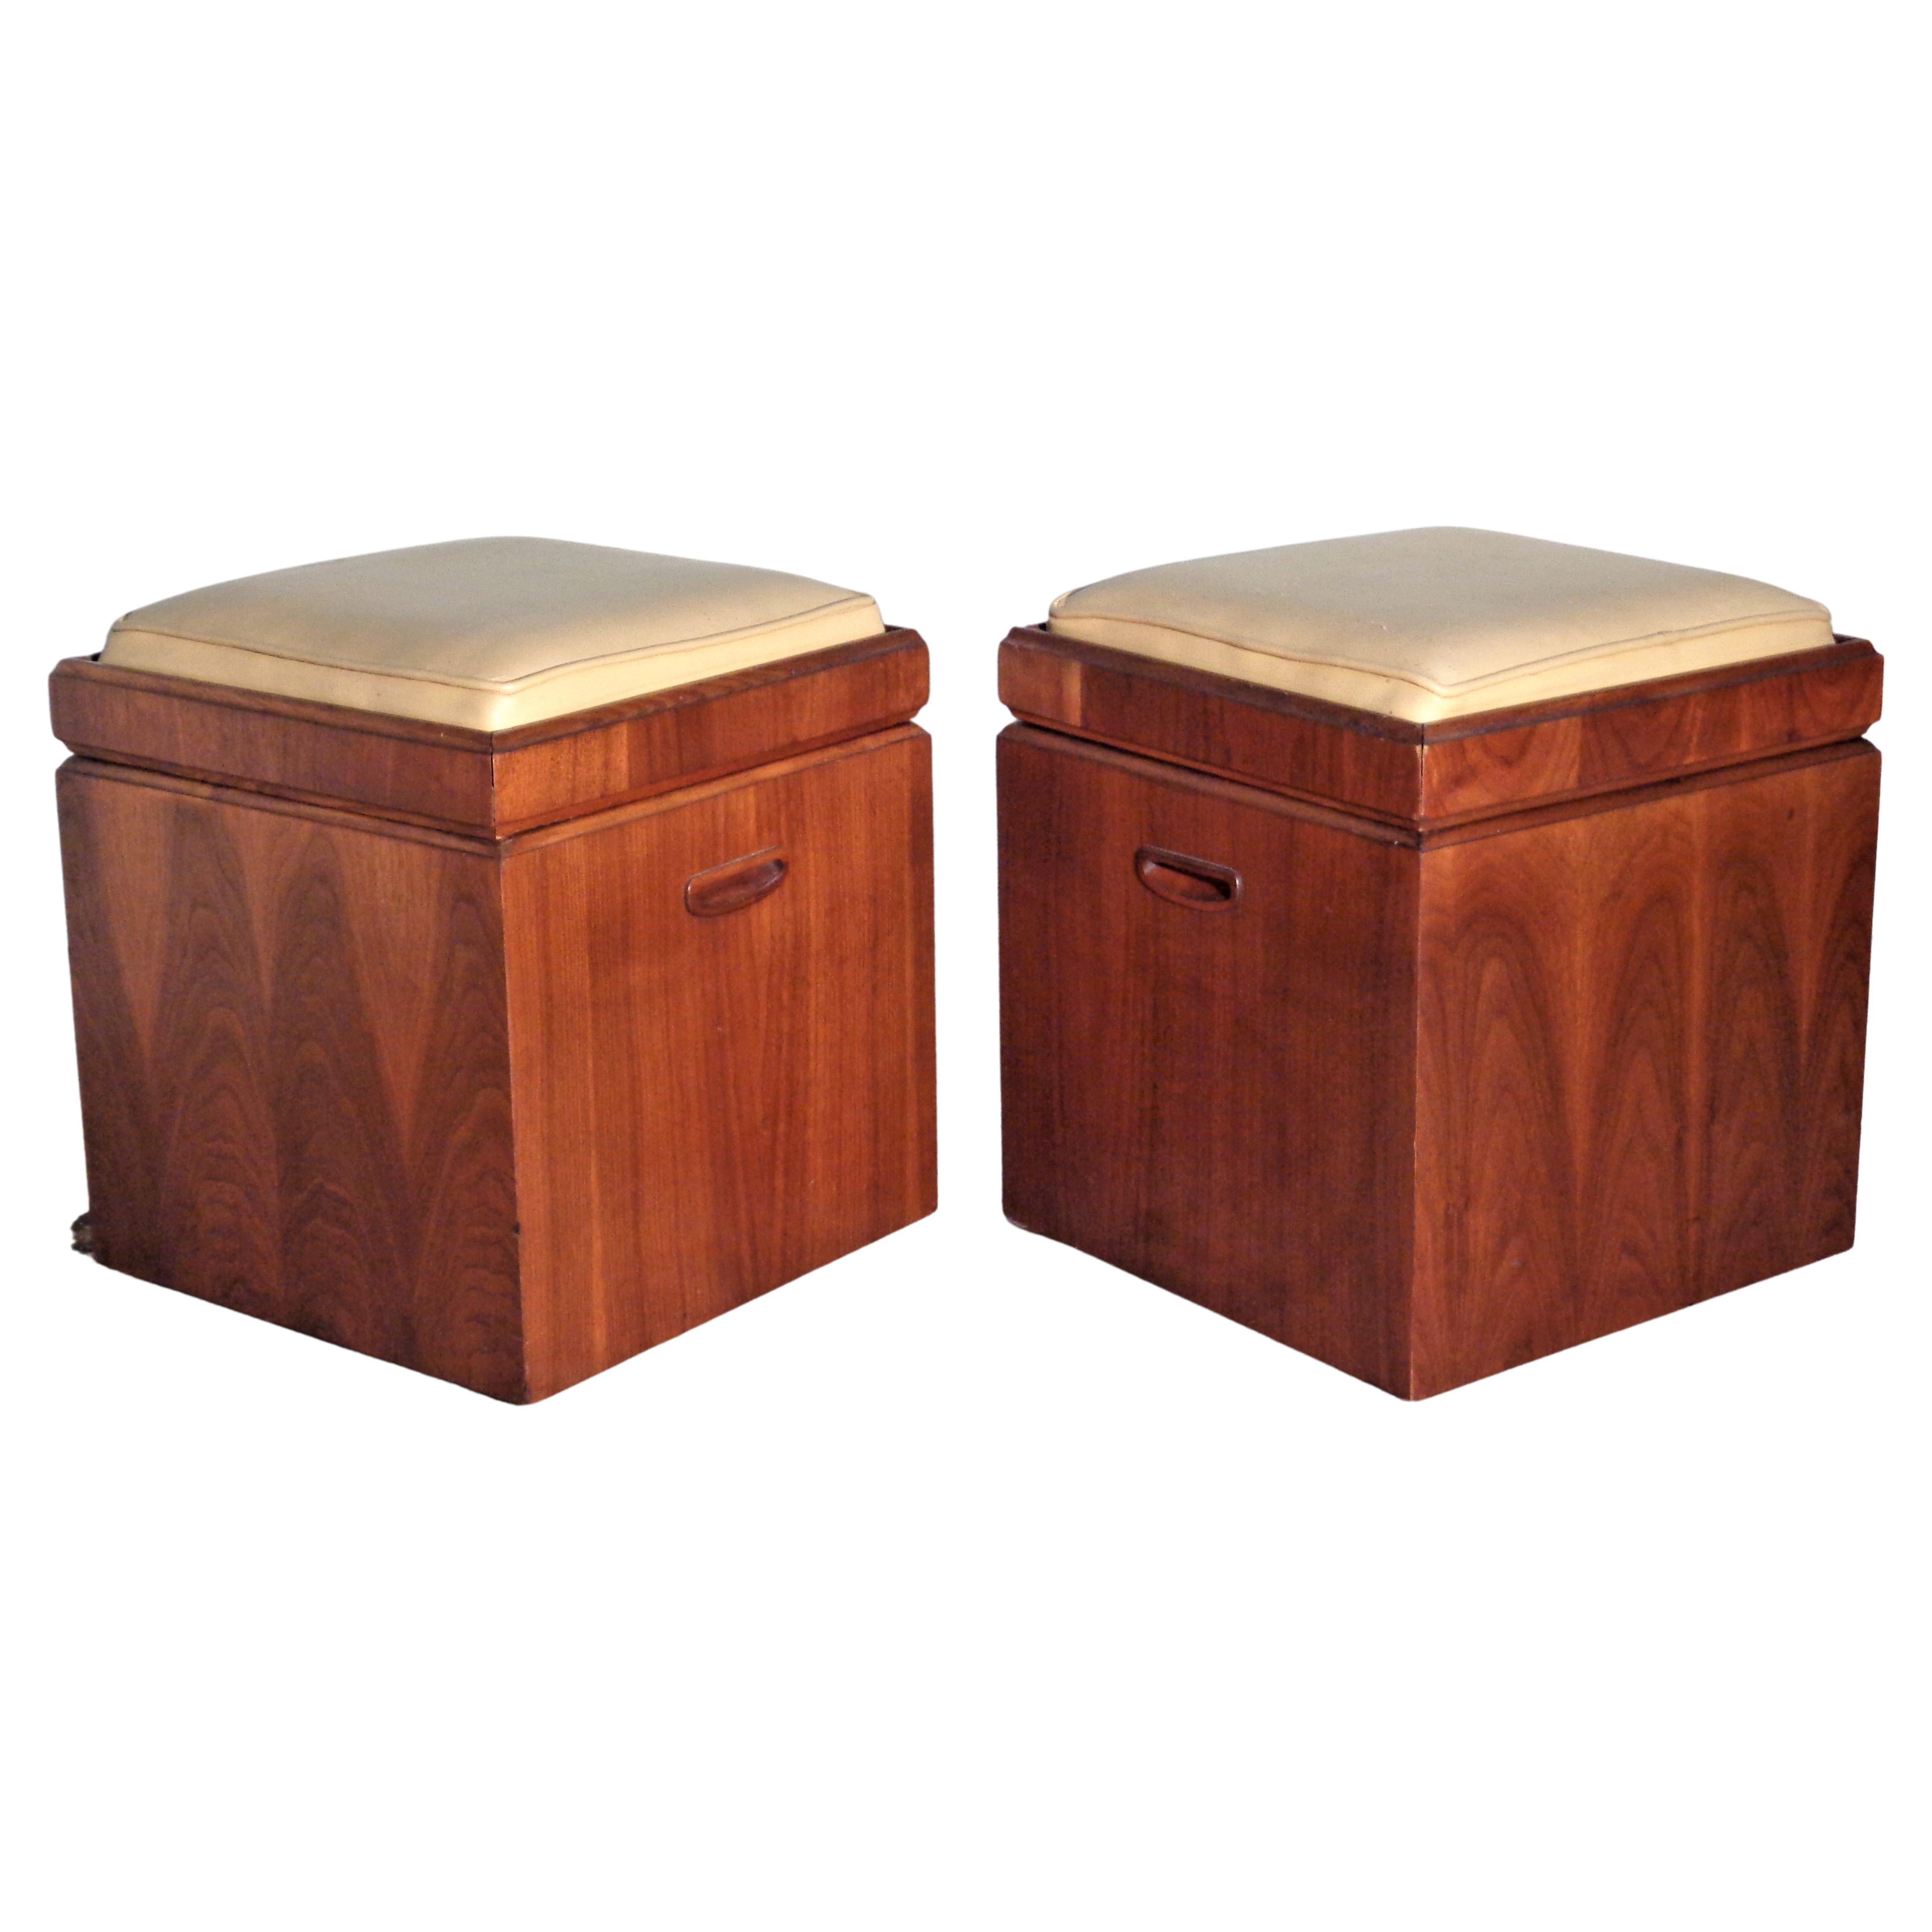 Pair of beautifully figured walnut veneer faux leather upholstered seat flip top cube ottomans with chess boards / checker boards on underside of seat / wide open interiors for storage and the original small rolling casters on bottom. Stamped Lane